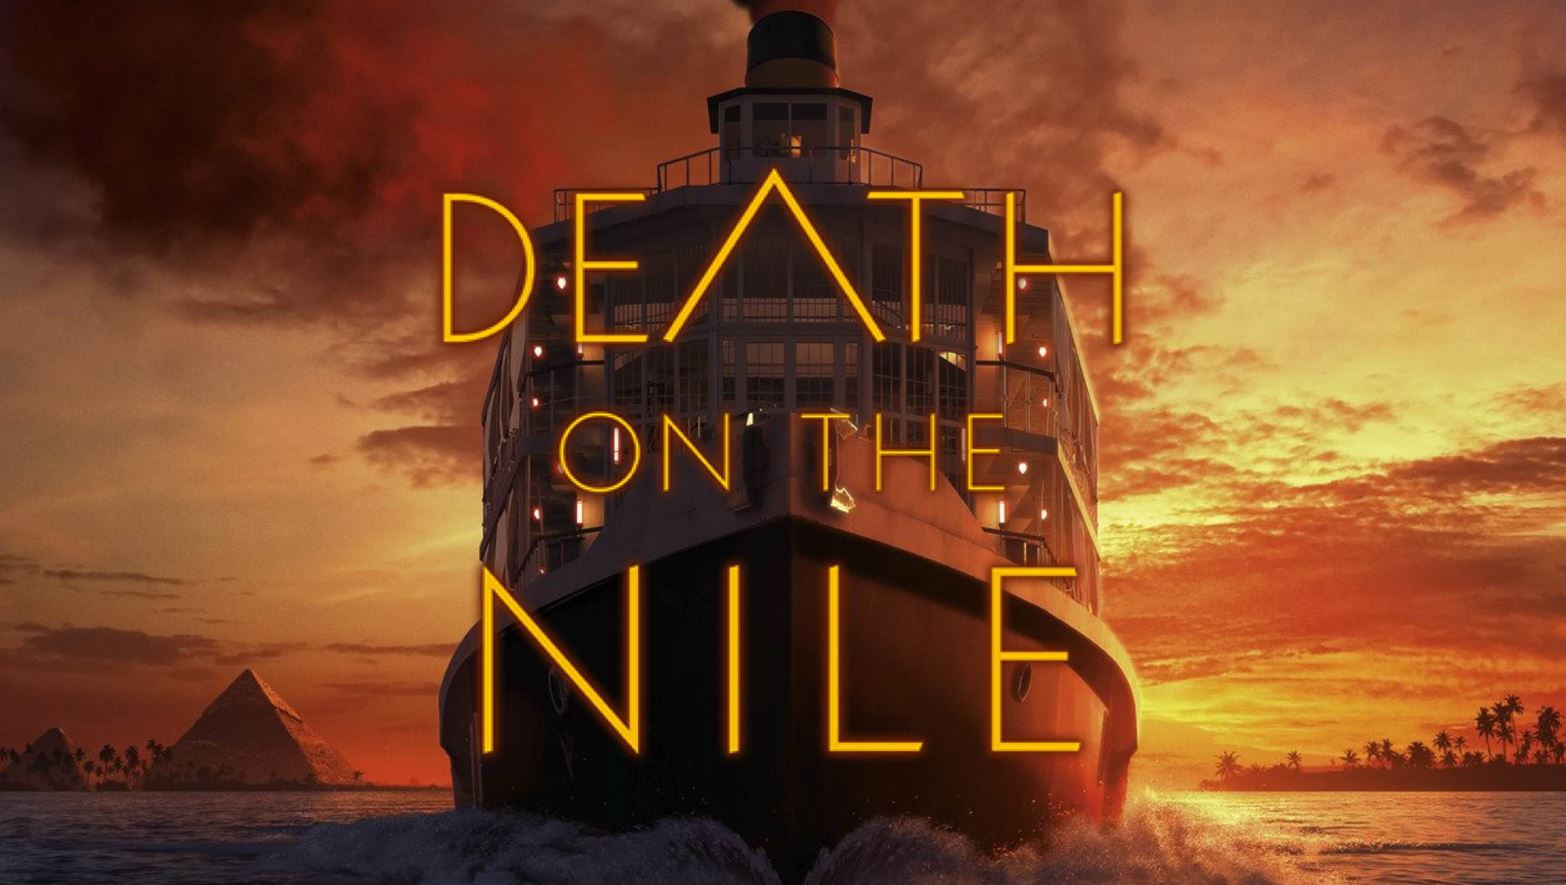 The death nile on The Ending